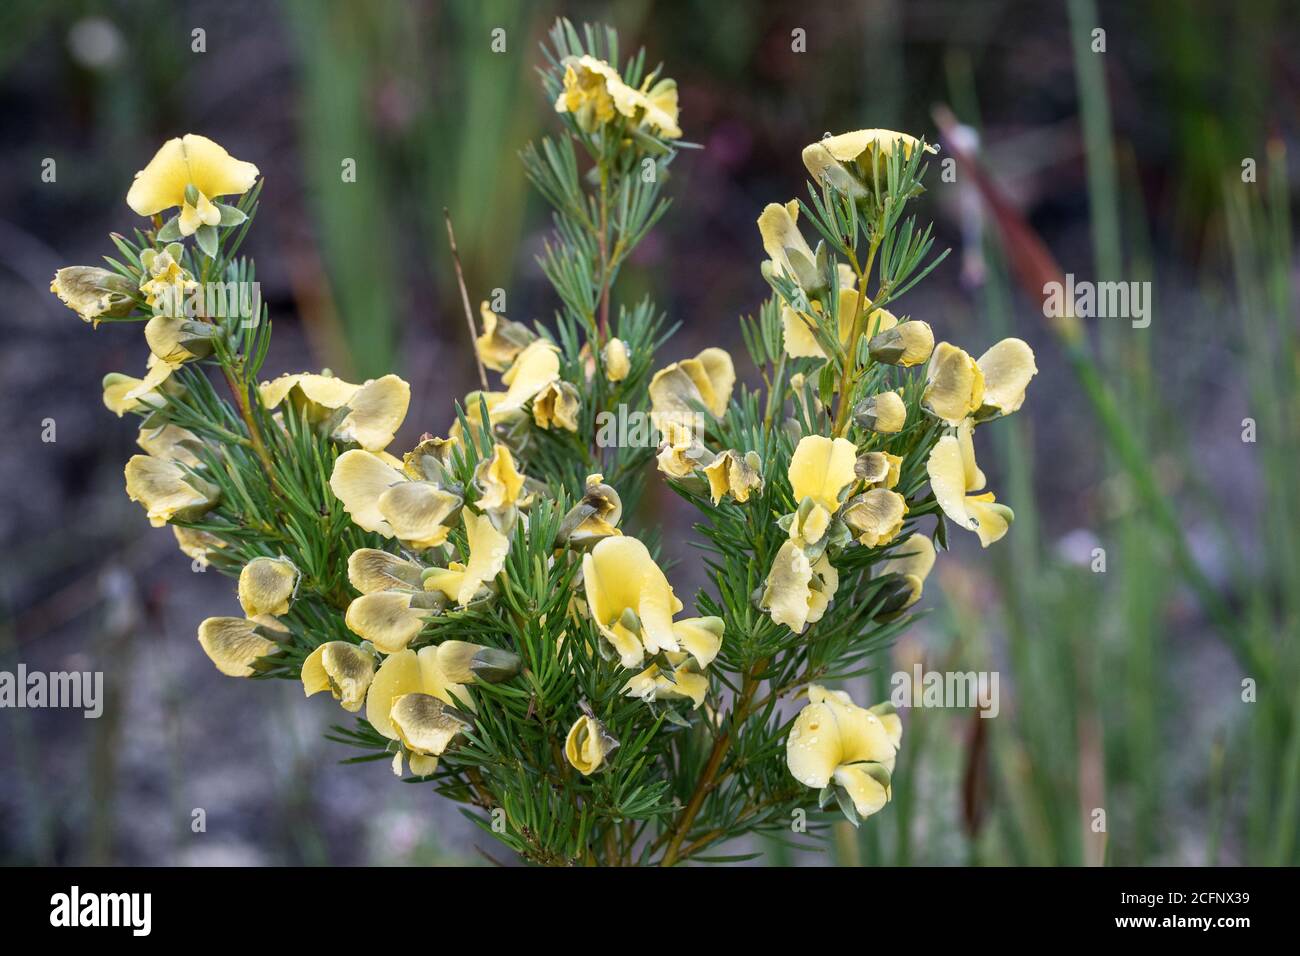 Large Wedge Pea plant in flower Stock Photo